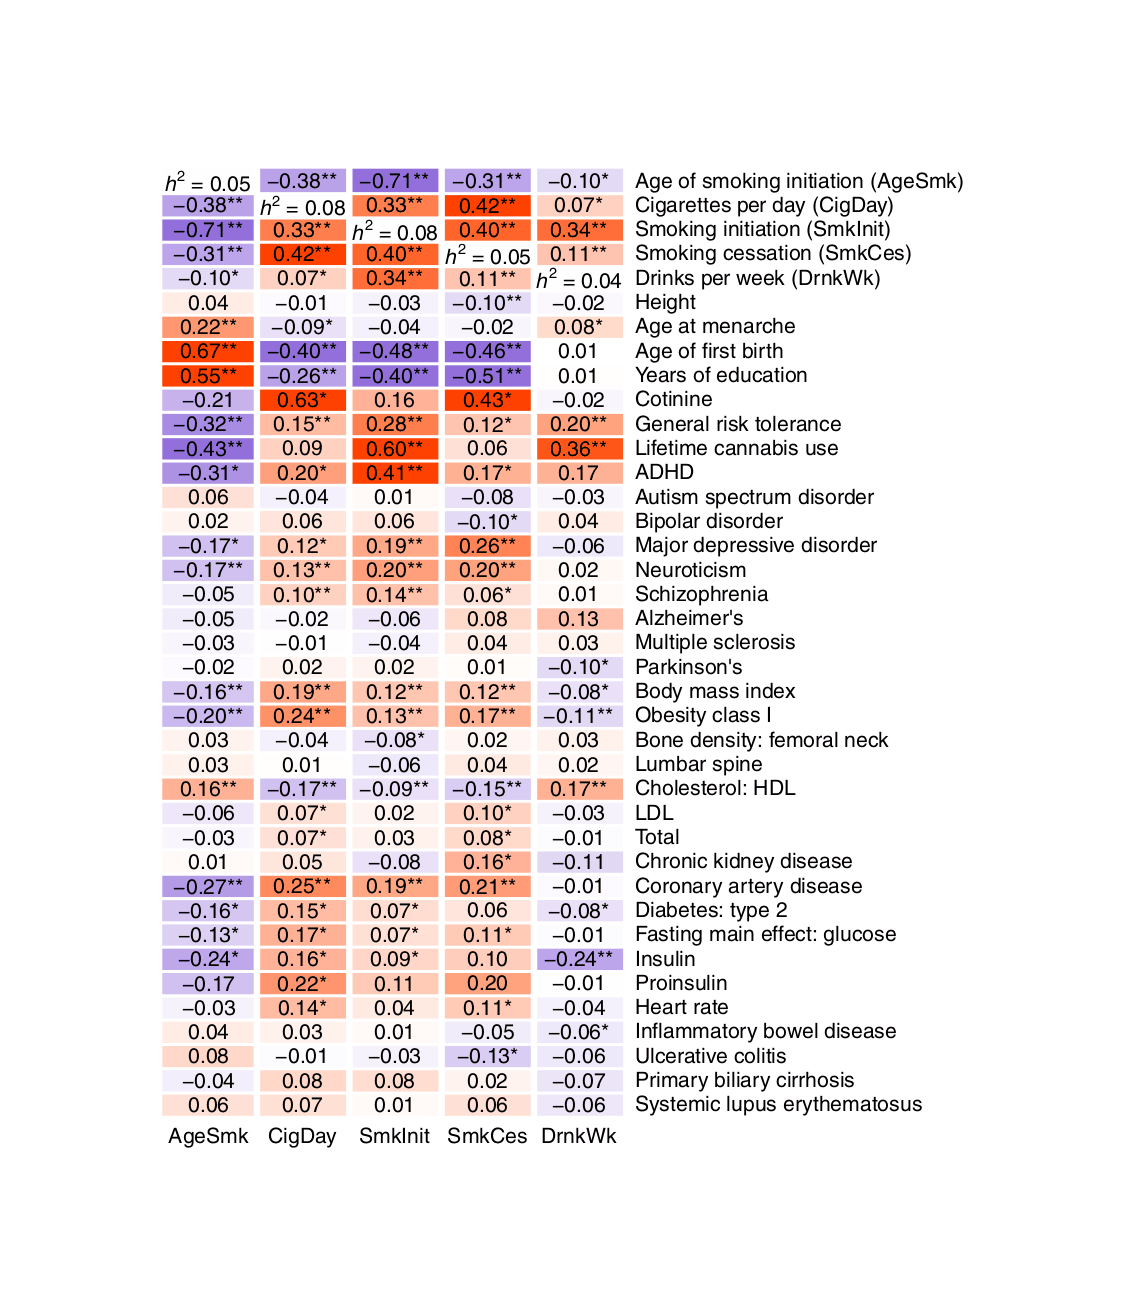 Liu et al 2019: “Fig. 1 | Genetic correlations between substance use phenotypes and phenotypes from other large GWAS. Genetic correlations between each of the phenotypes are shown in the first 5 rows, with heritability estimates displayed down the diagonal. All genetic correlations and heritability estimates were calculated using LD score regression. Purple shading represents negative genetic correlations, and red shading represents positive correlations, with increasing color intensity reflecting increasing correlation strength. A single asterisk reflects a significant genetic correlation at the p < 0.05 level. Double asterisks reflect a significant genetic correlation at the Bonferroni-correction p < 0.000278 level (corrected for 180 independent tests). Note that SmkCes was oriented such that higher scores reflected current smoking, and for AgeSmk, lower scores reflect earlier ages of initiation, both of which are typically associated with negative outcomes.”